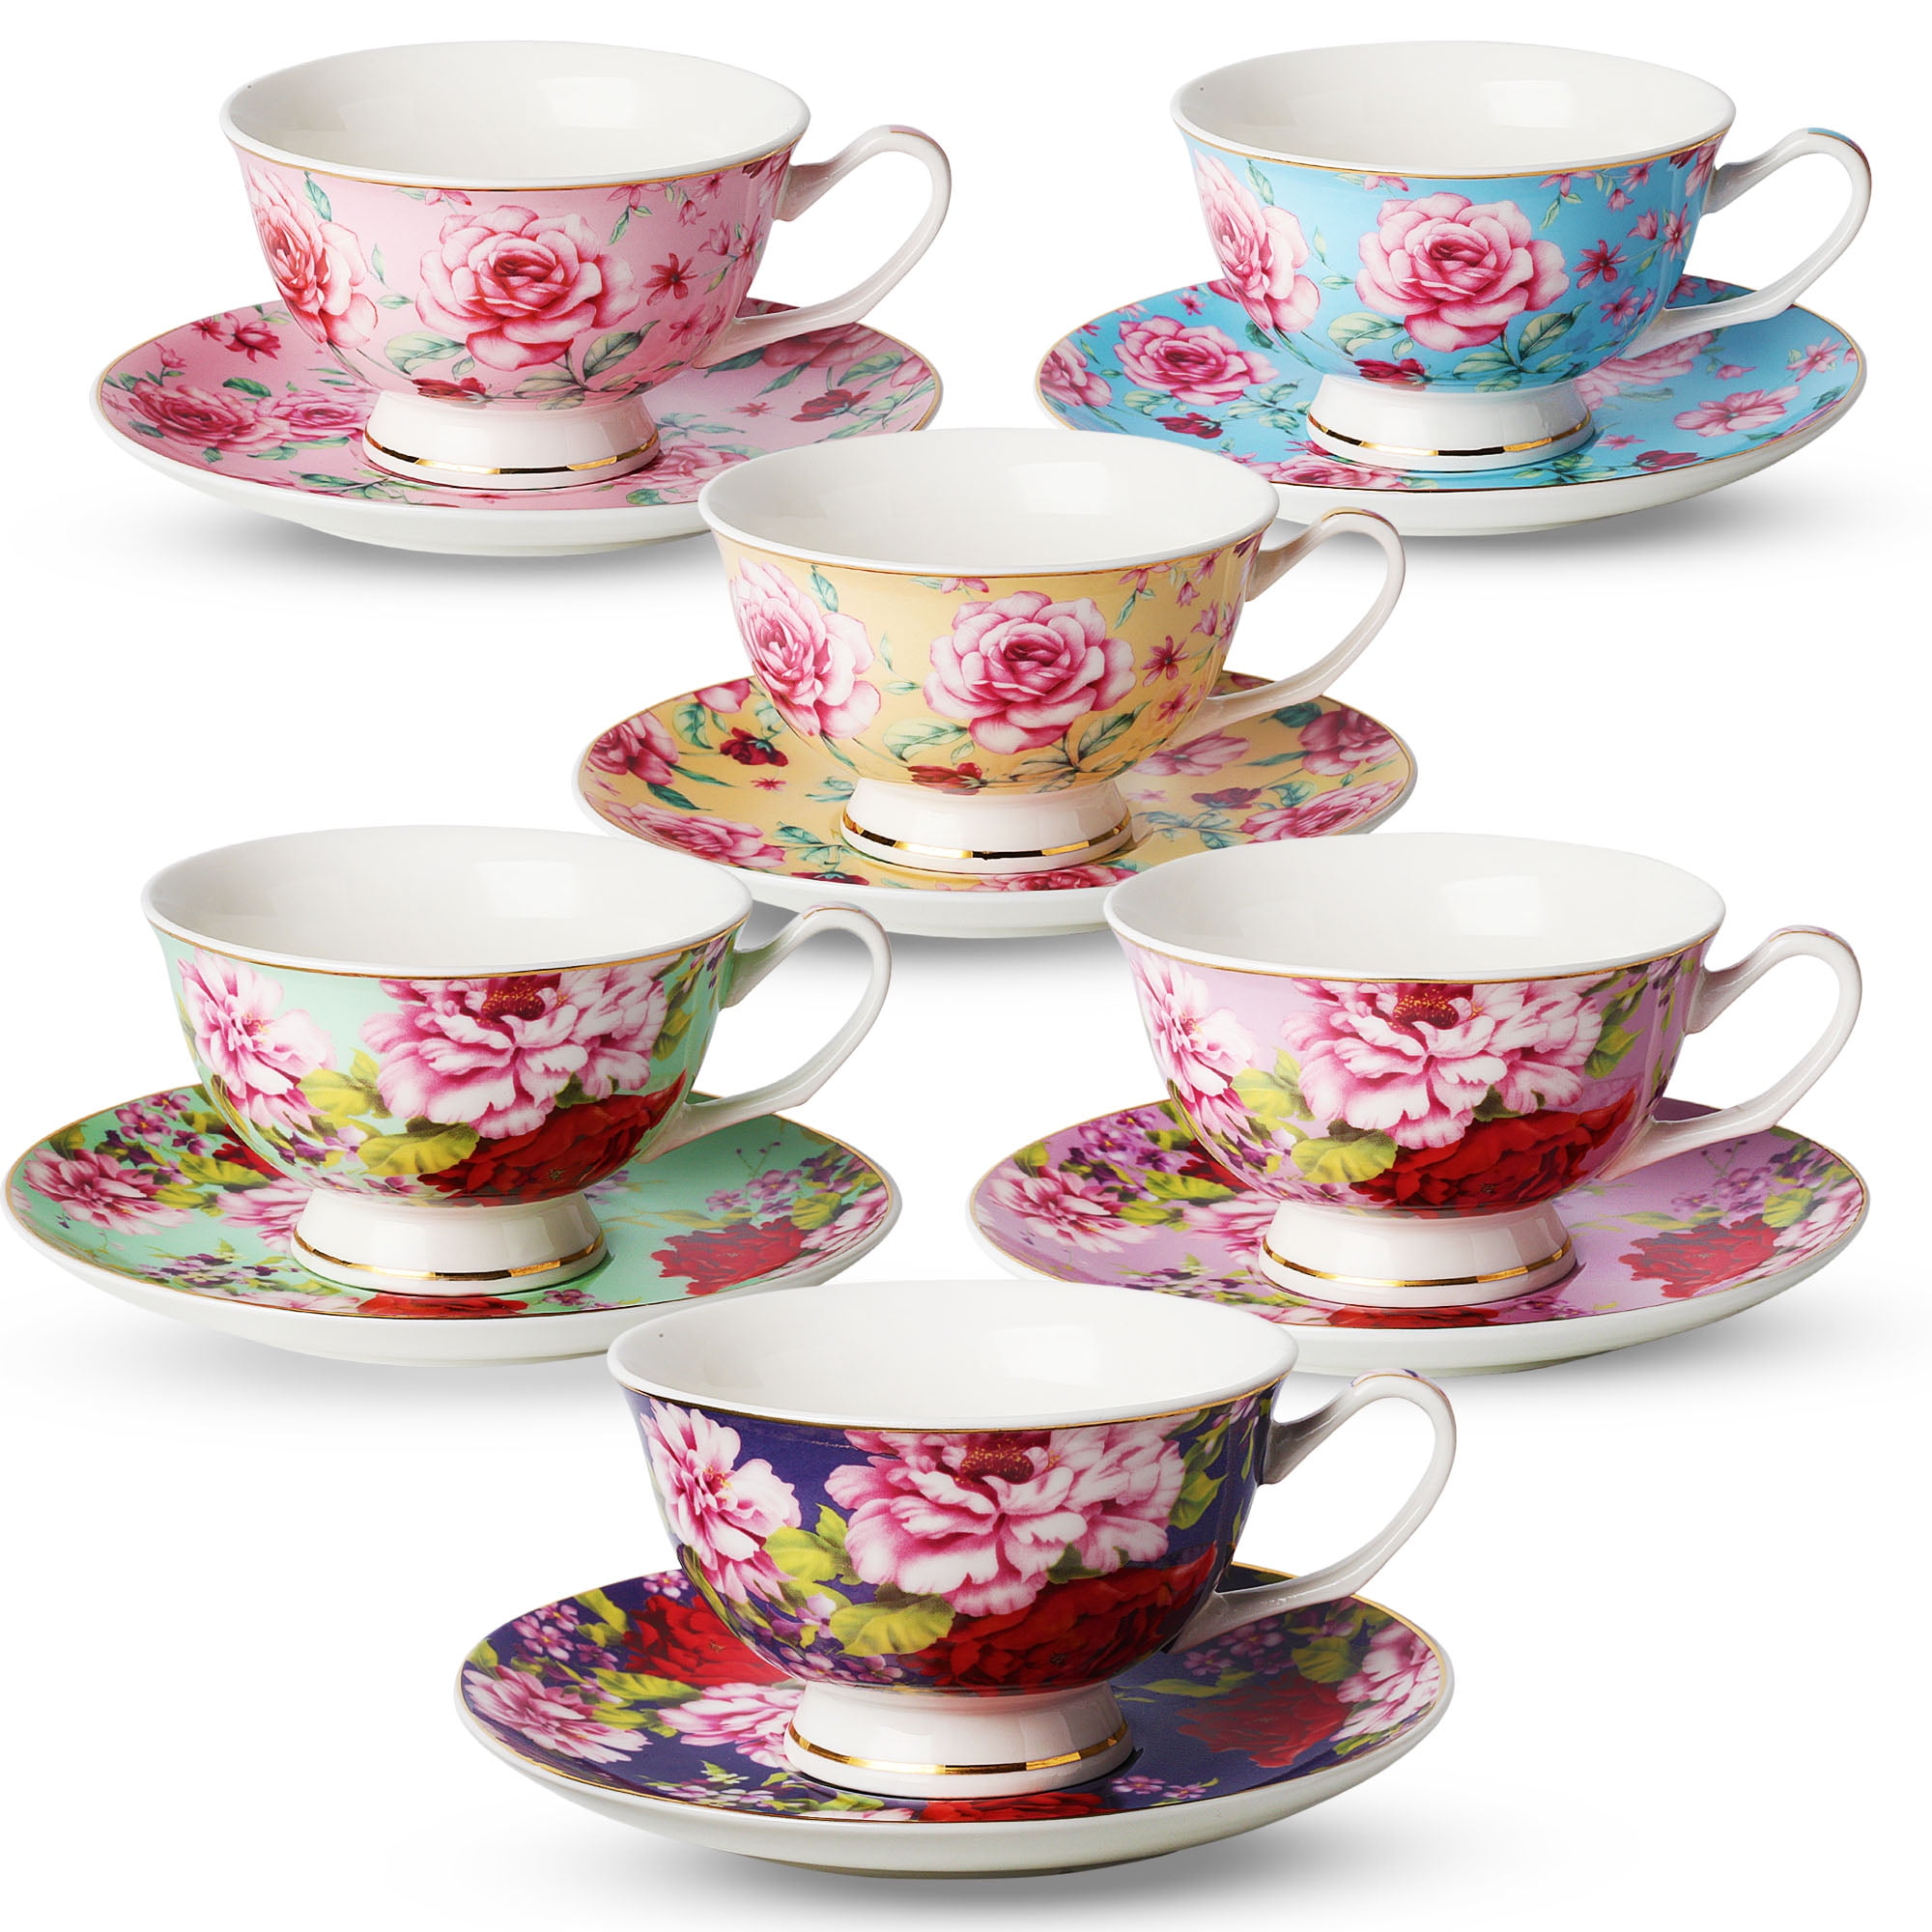 Tea Cup And Saucer Set Of 6 12 Pieces Floral Tea Cups 8 Ozbone China Porcelain 8842